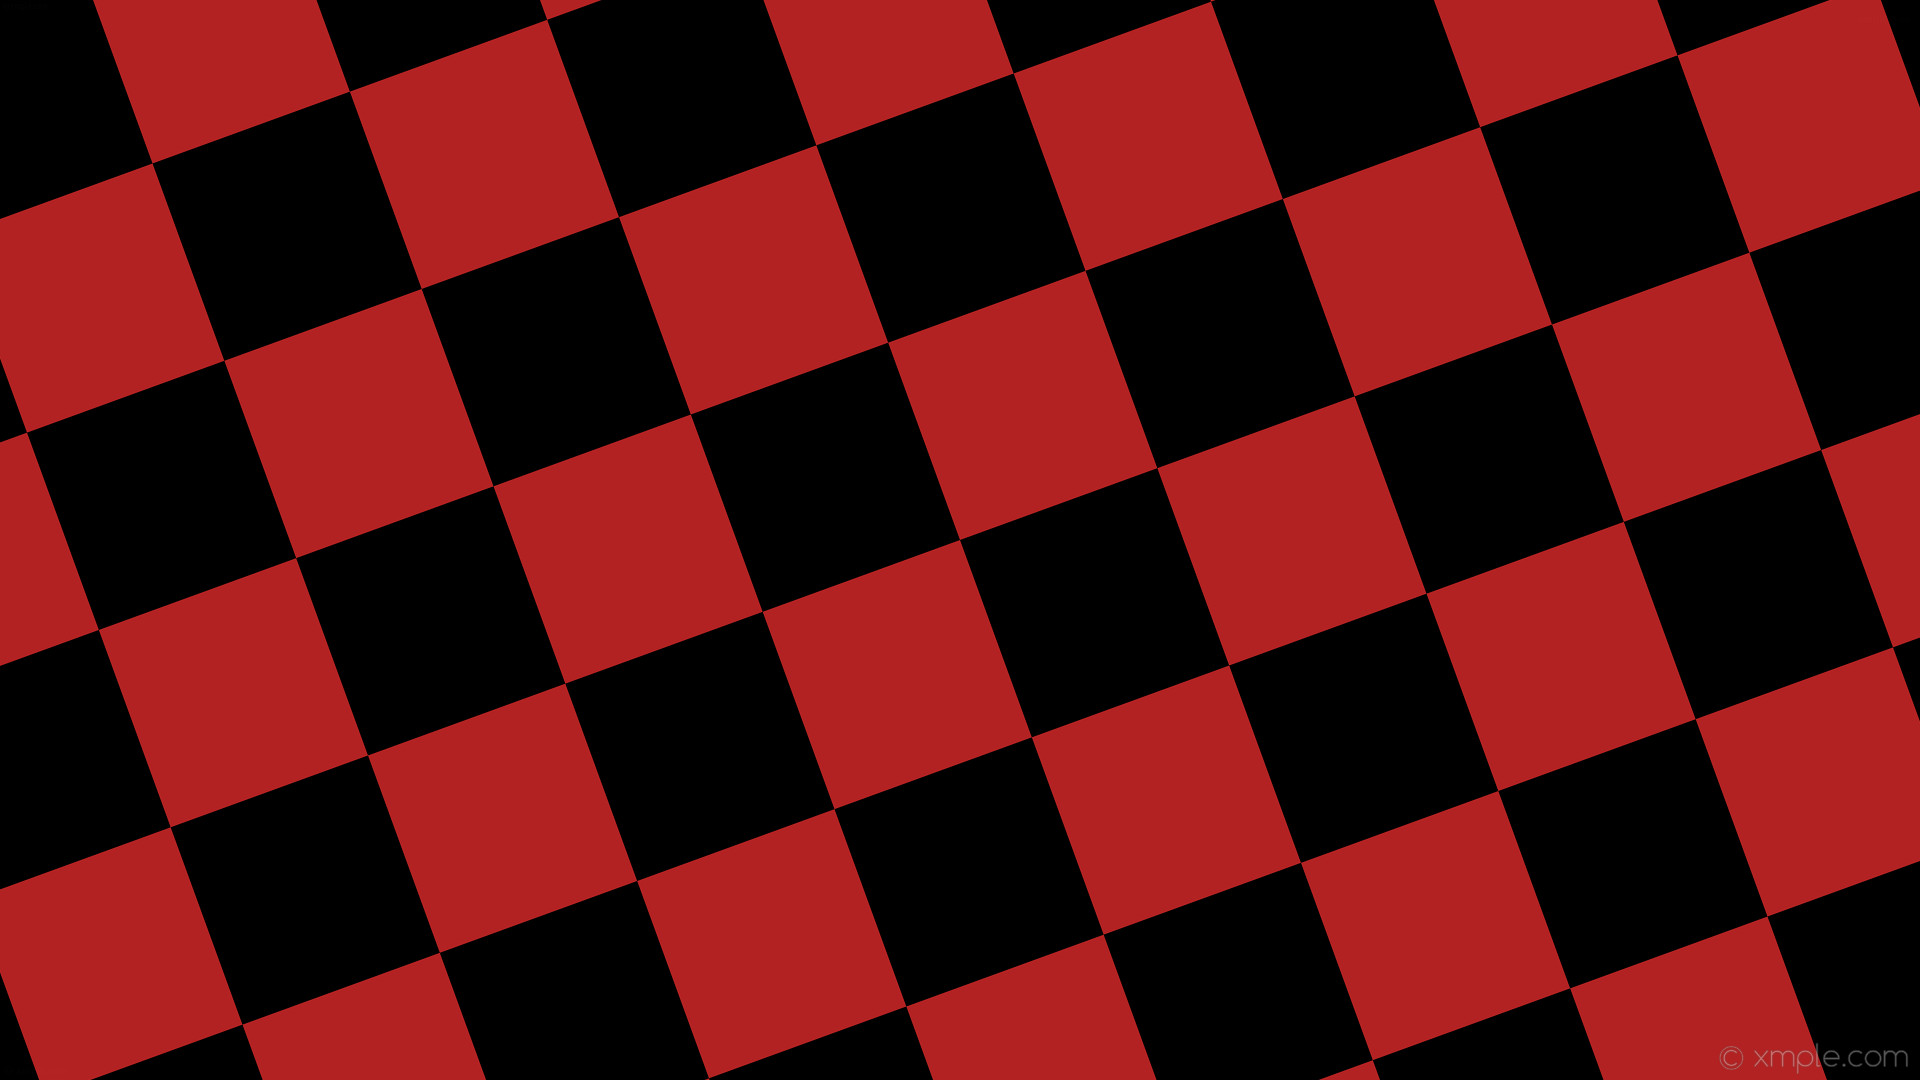 1920x1080 Red checked Wallpaper - WallpaperSafari Free Facebook Cover Photos, Cool  Twitter Backgrounds, Unique .